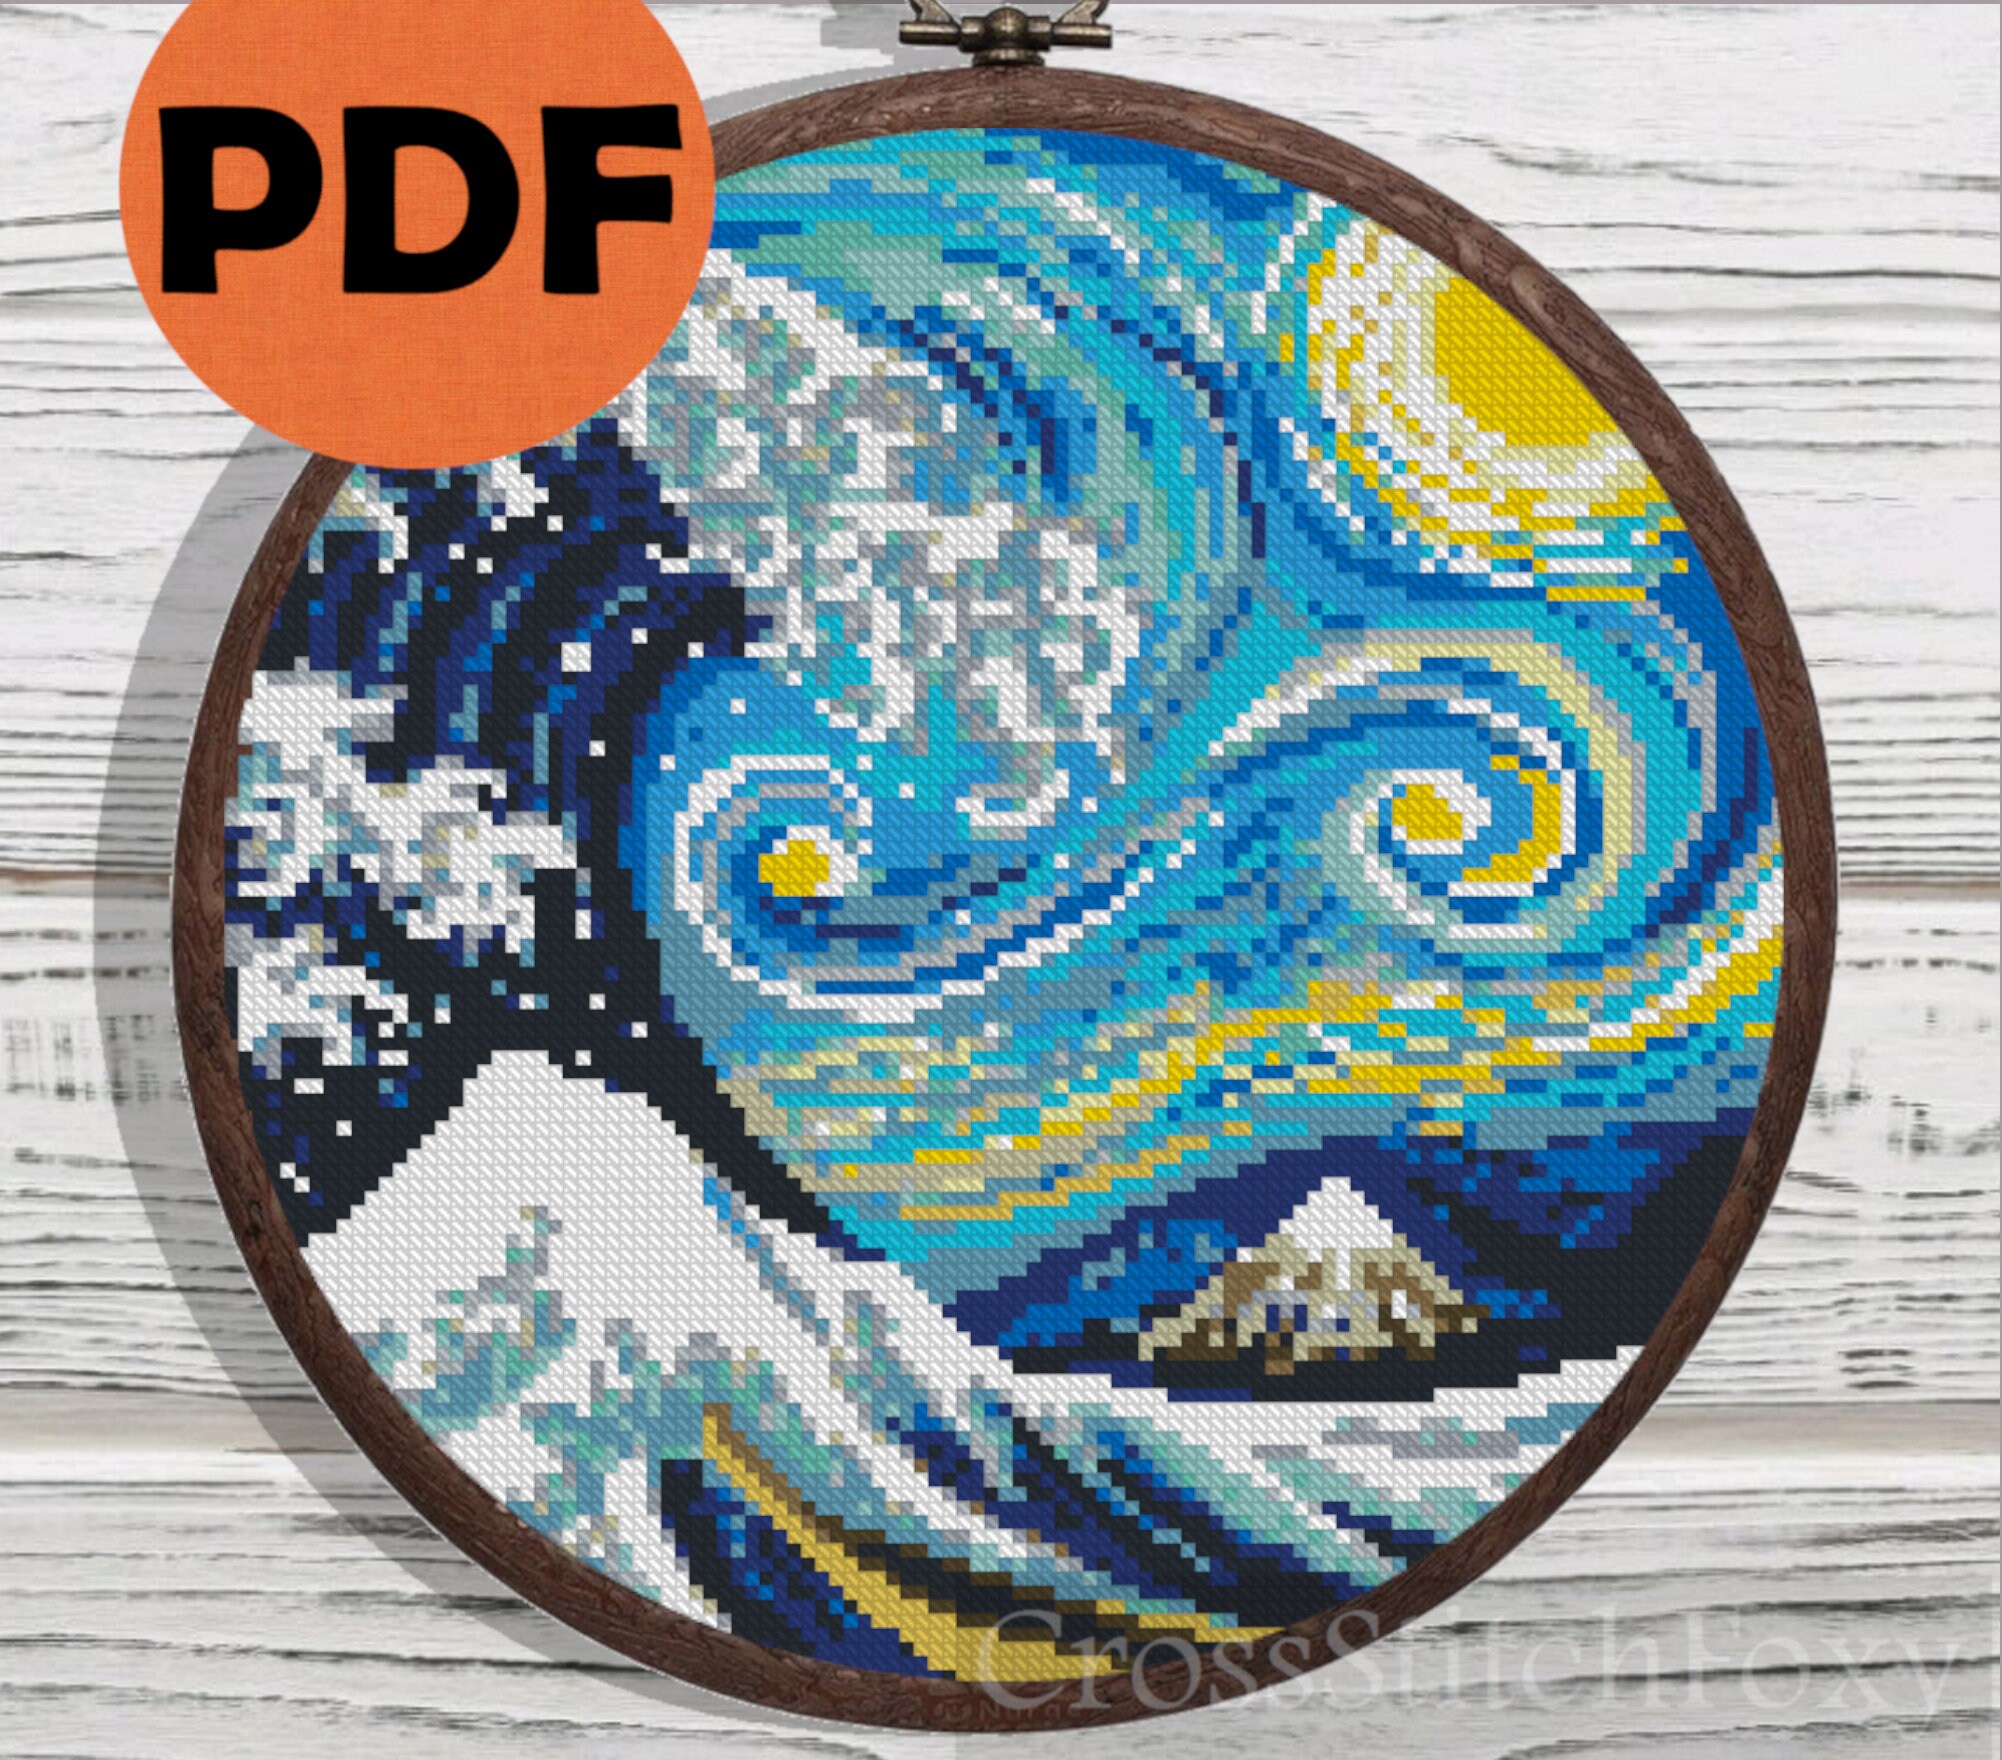 Joy Sunday Cross Stitch Kits 14CT Counted The Starry Night of Van Gogh Patterns Embroidery for Girls Crafts DMC Cross-Stitch Supplies Needlework 